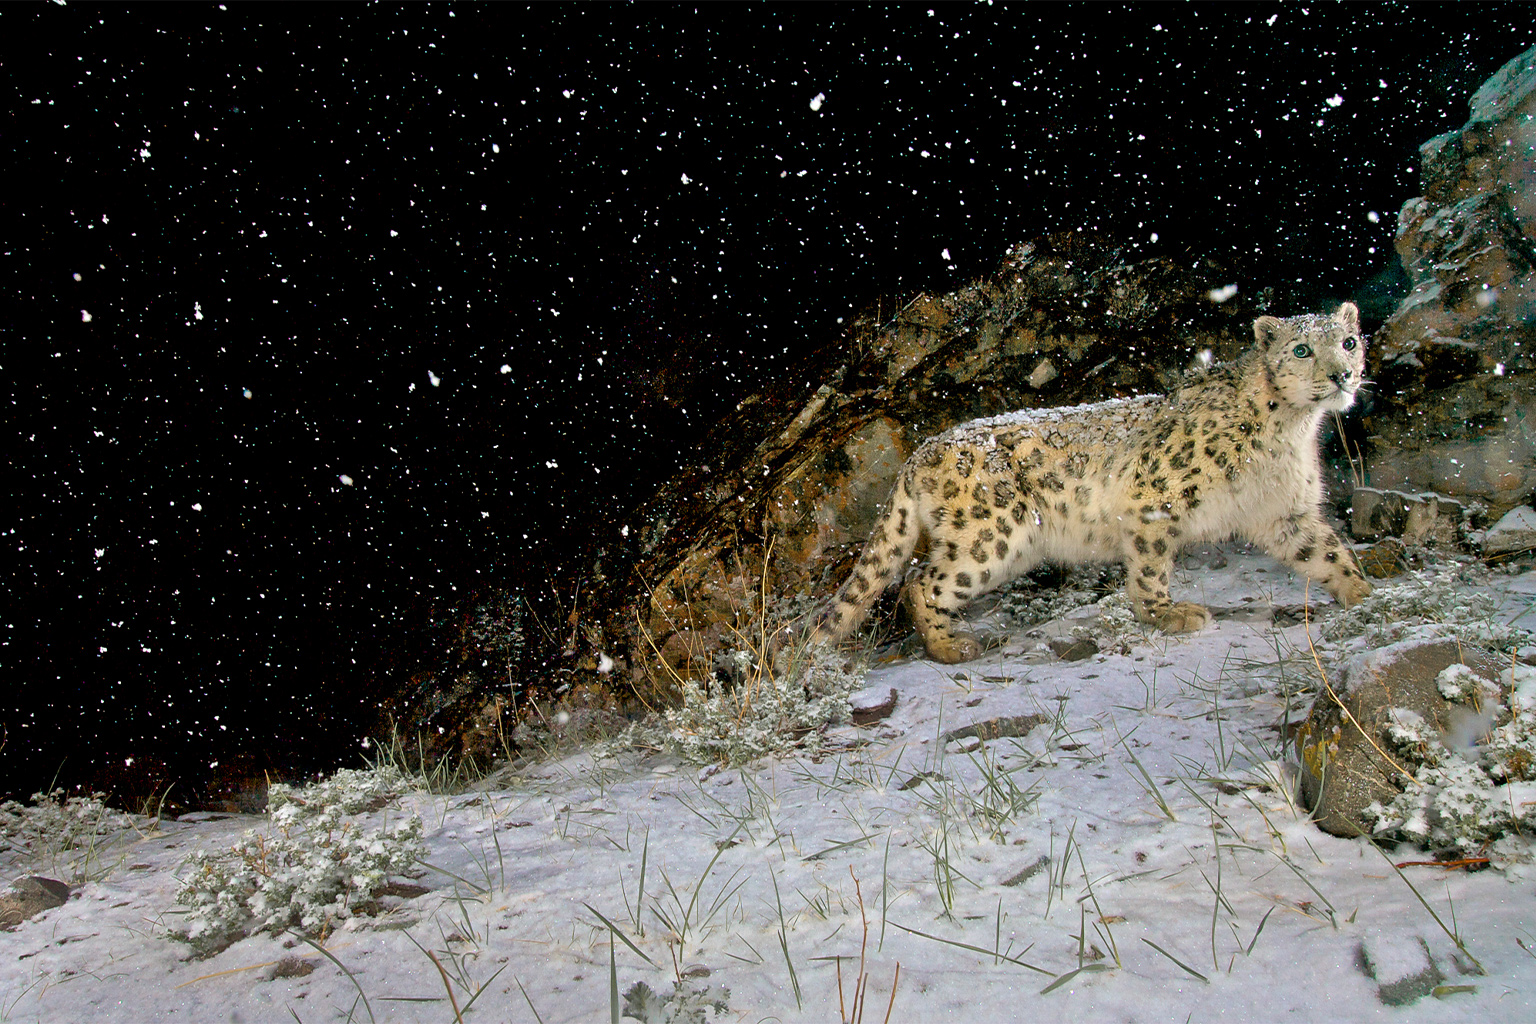 A snow leopard traverses an extreme alpine landscape in a nighttime snowstorm.